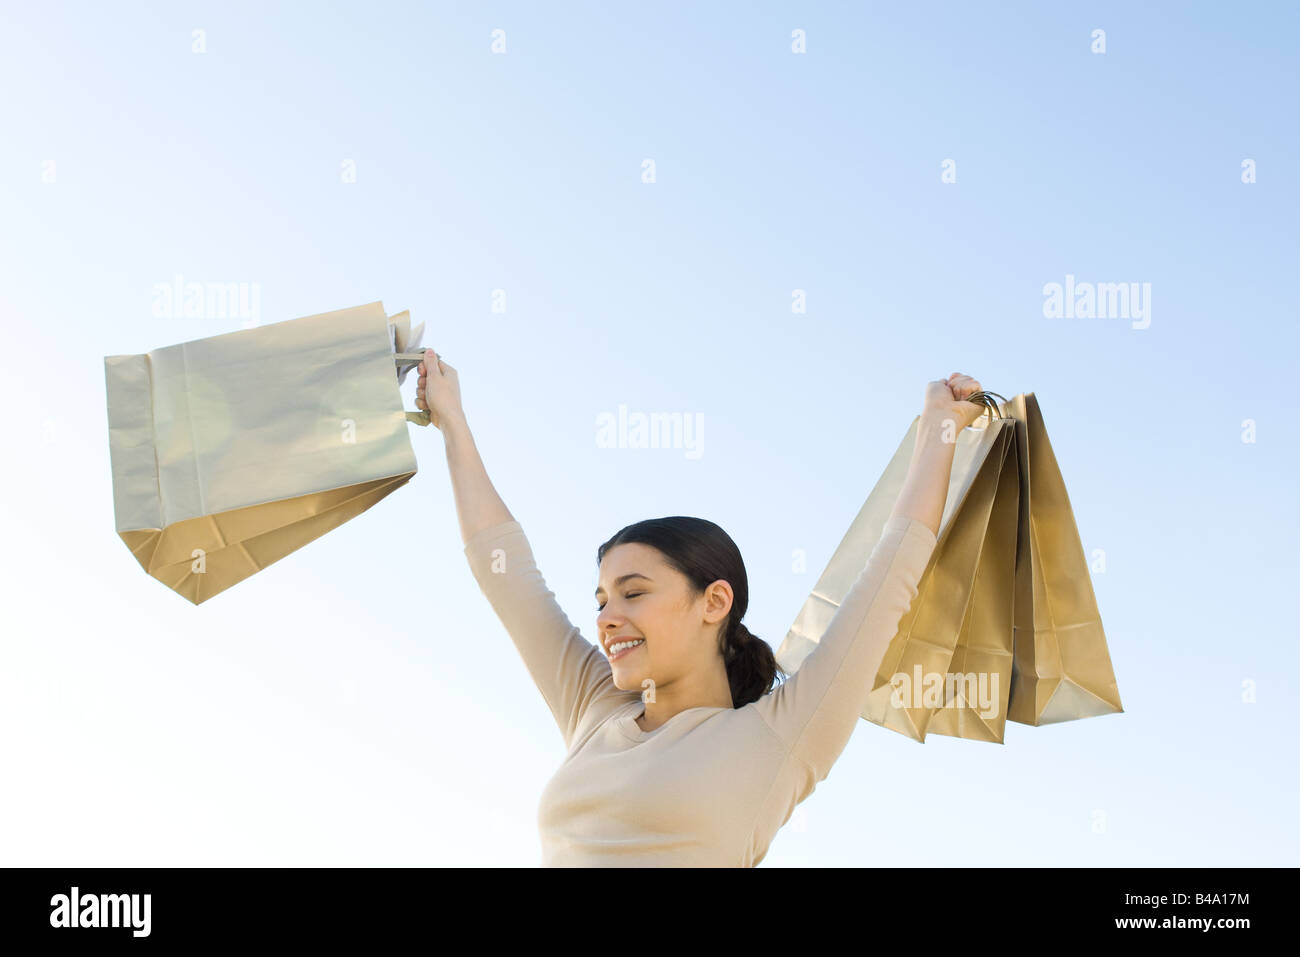 Woman holding up shopping bags, smiling, eyes closed Stock Photo